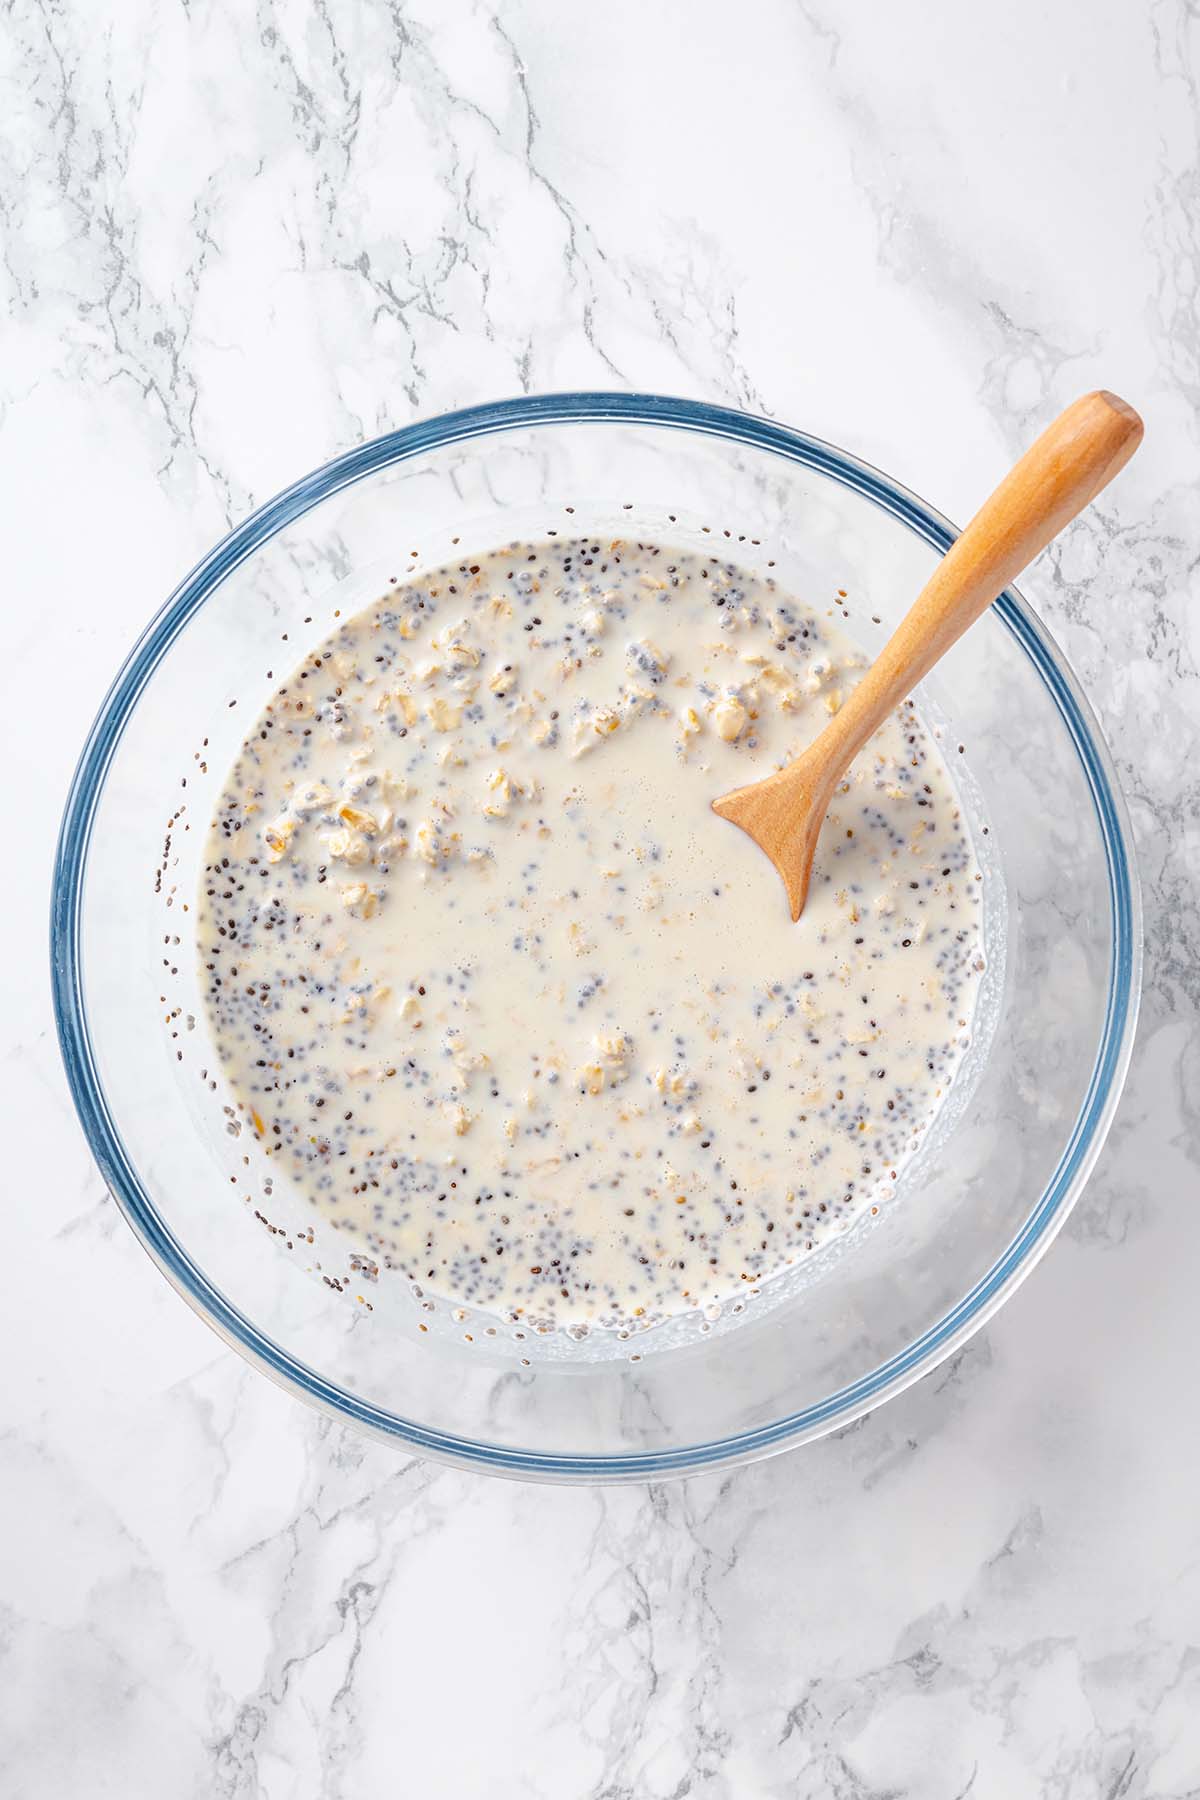 Process of making overnight oats showing all ingredients in a bowl with wooden spoon